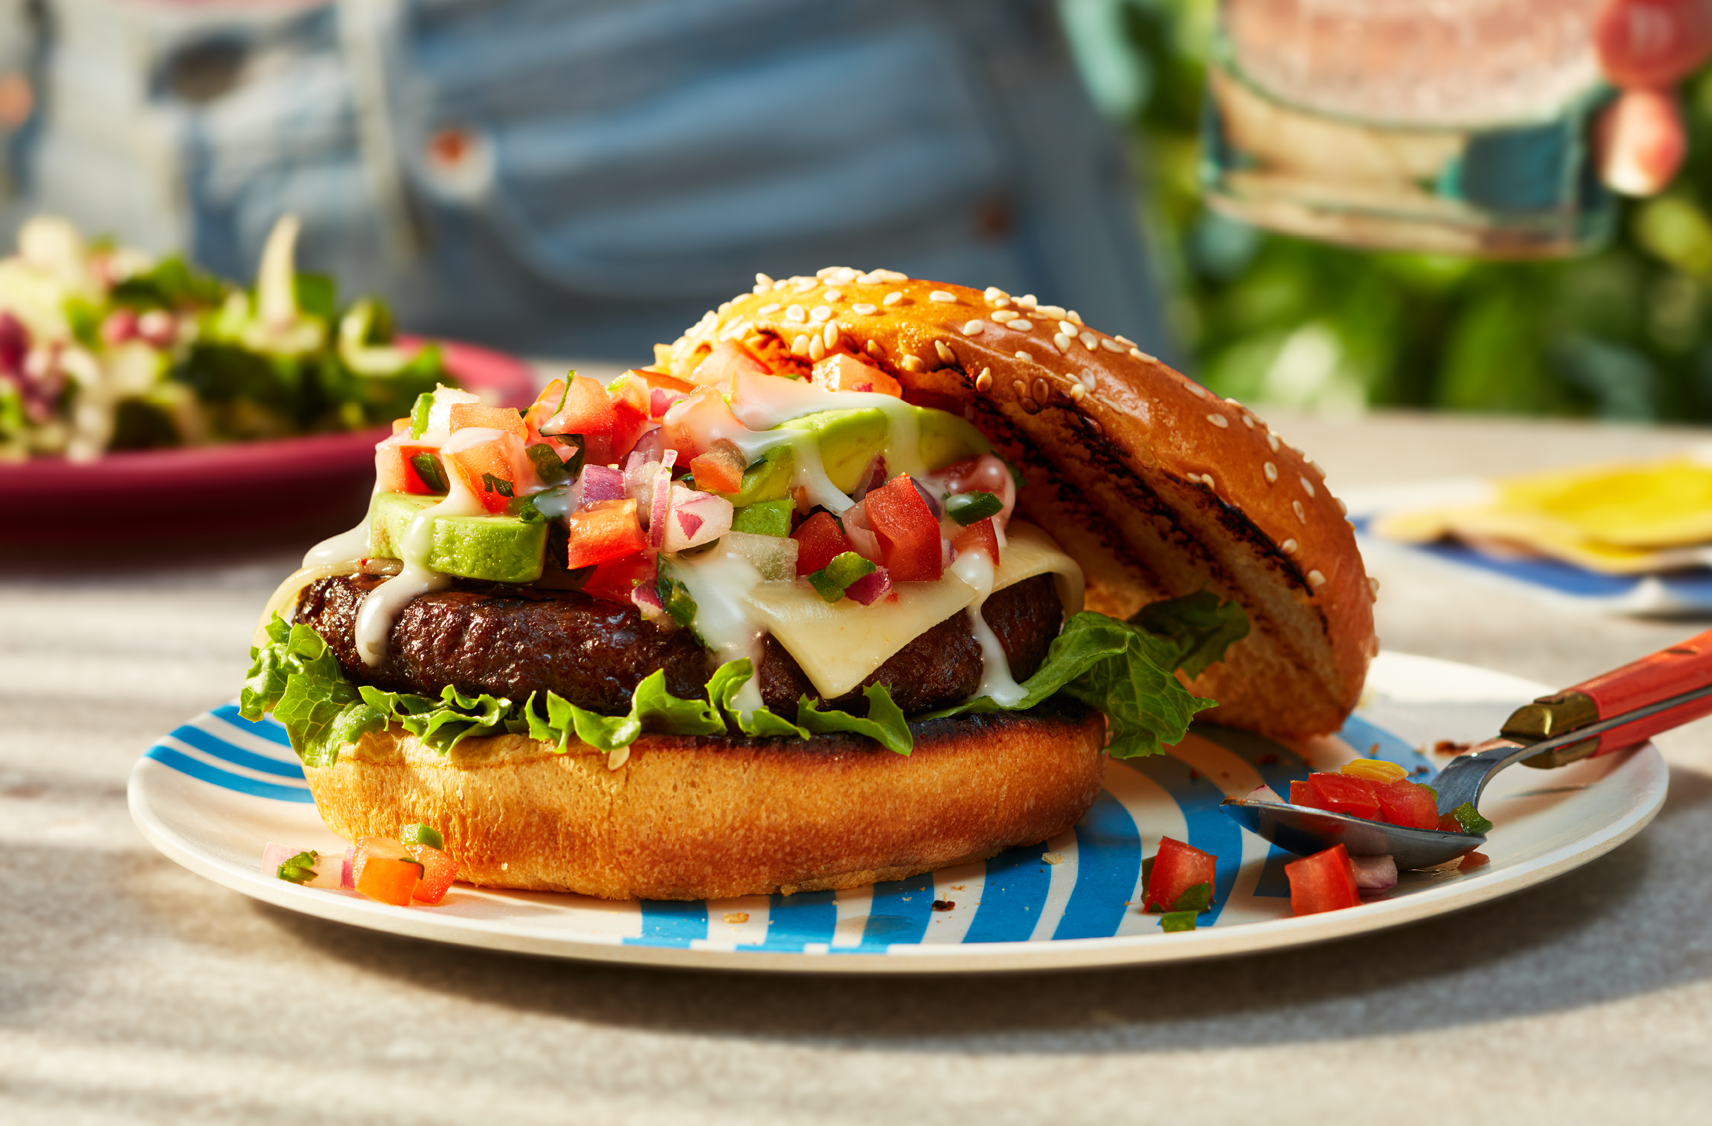 A PC World of Flavours Chipotle Beef Burger on toasted brioche buns loaded with Monterrey Jack cheese, jalapenos, avocado, pico de gallo and tangy PC Cilantro Lime Crema.